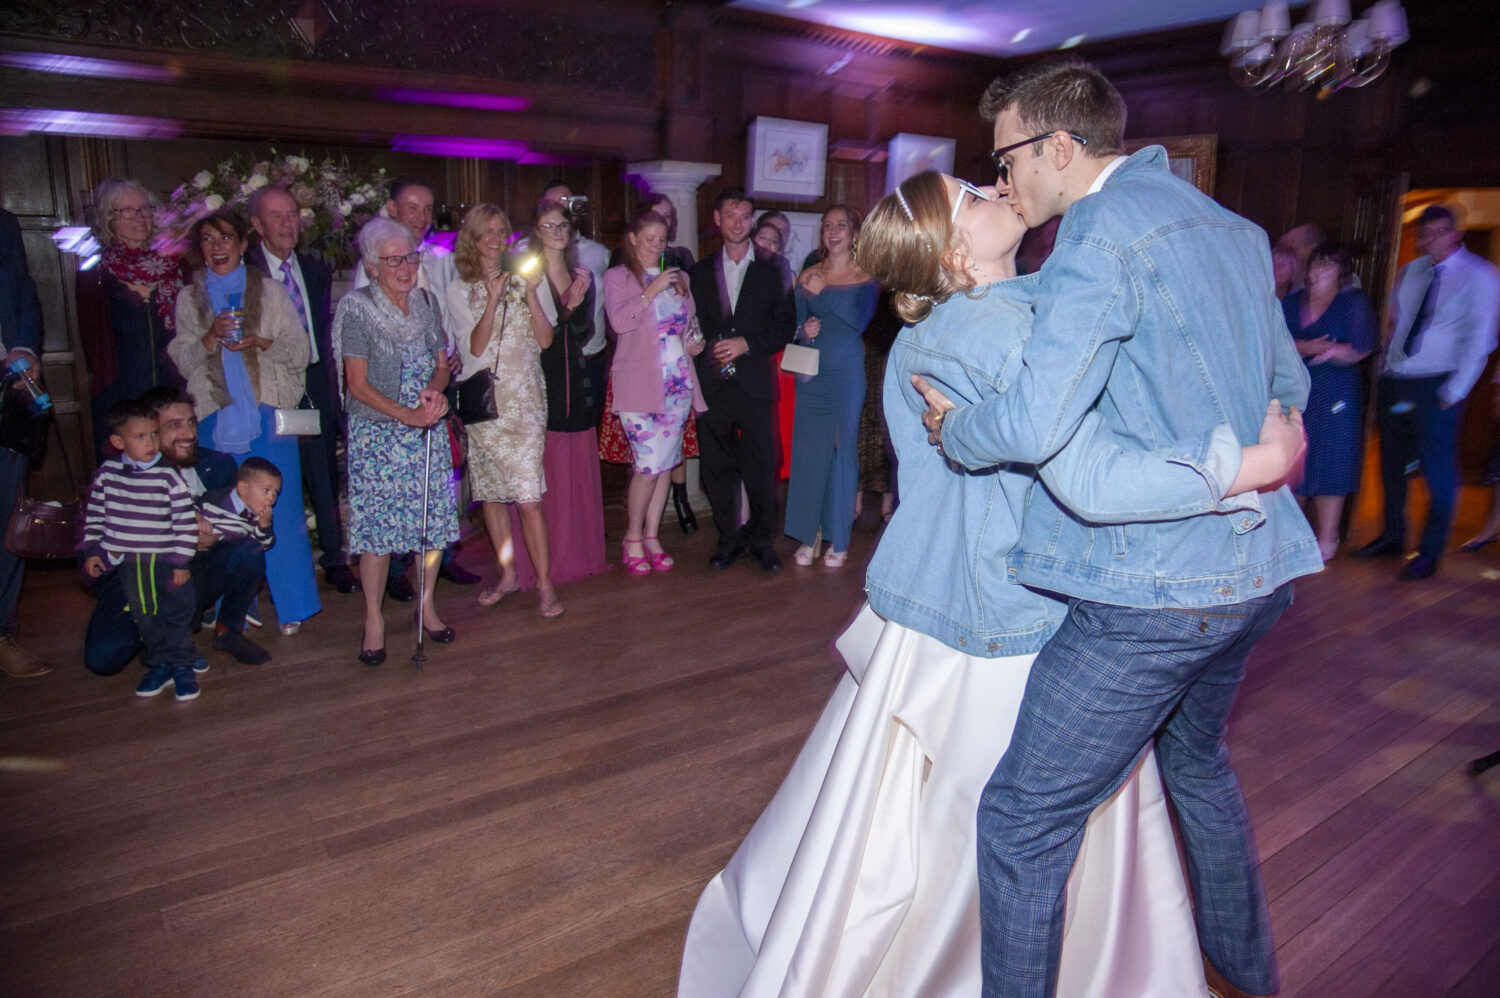 landwades hall, great hall, bride and groom first dance, denim jacket, heart shape sun shades, party, bride and groom kissing, arms wrapped, onlookers